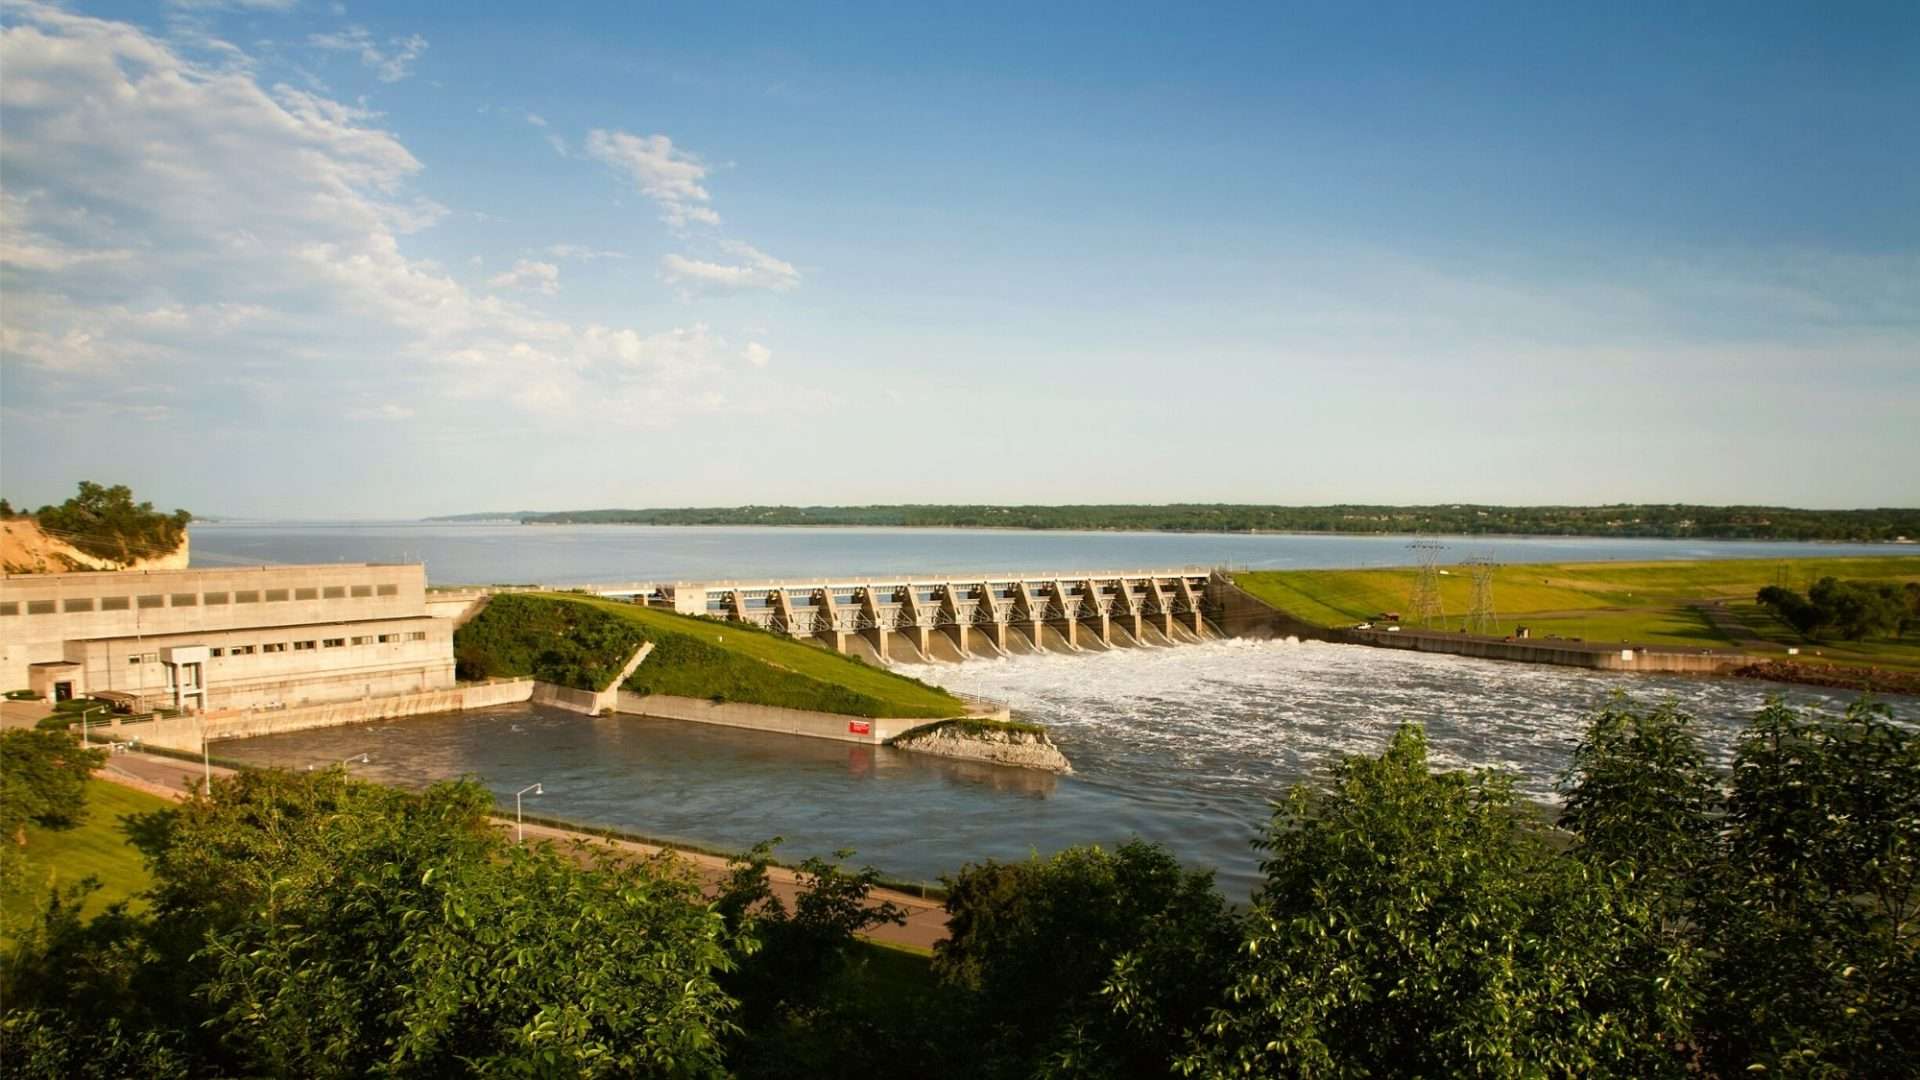 Gavins Point Dam built by the Corps of Engineers